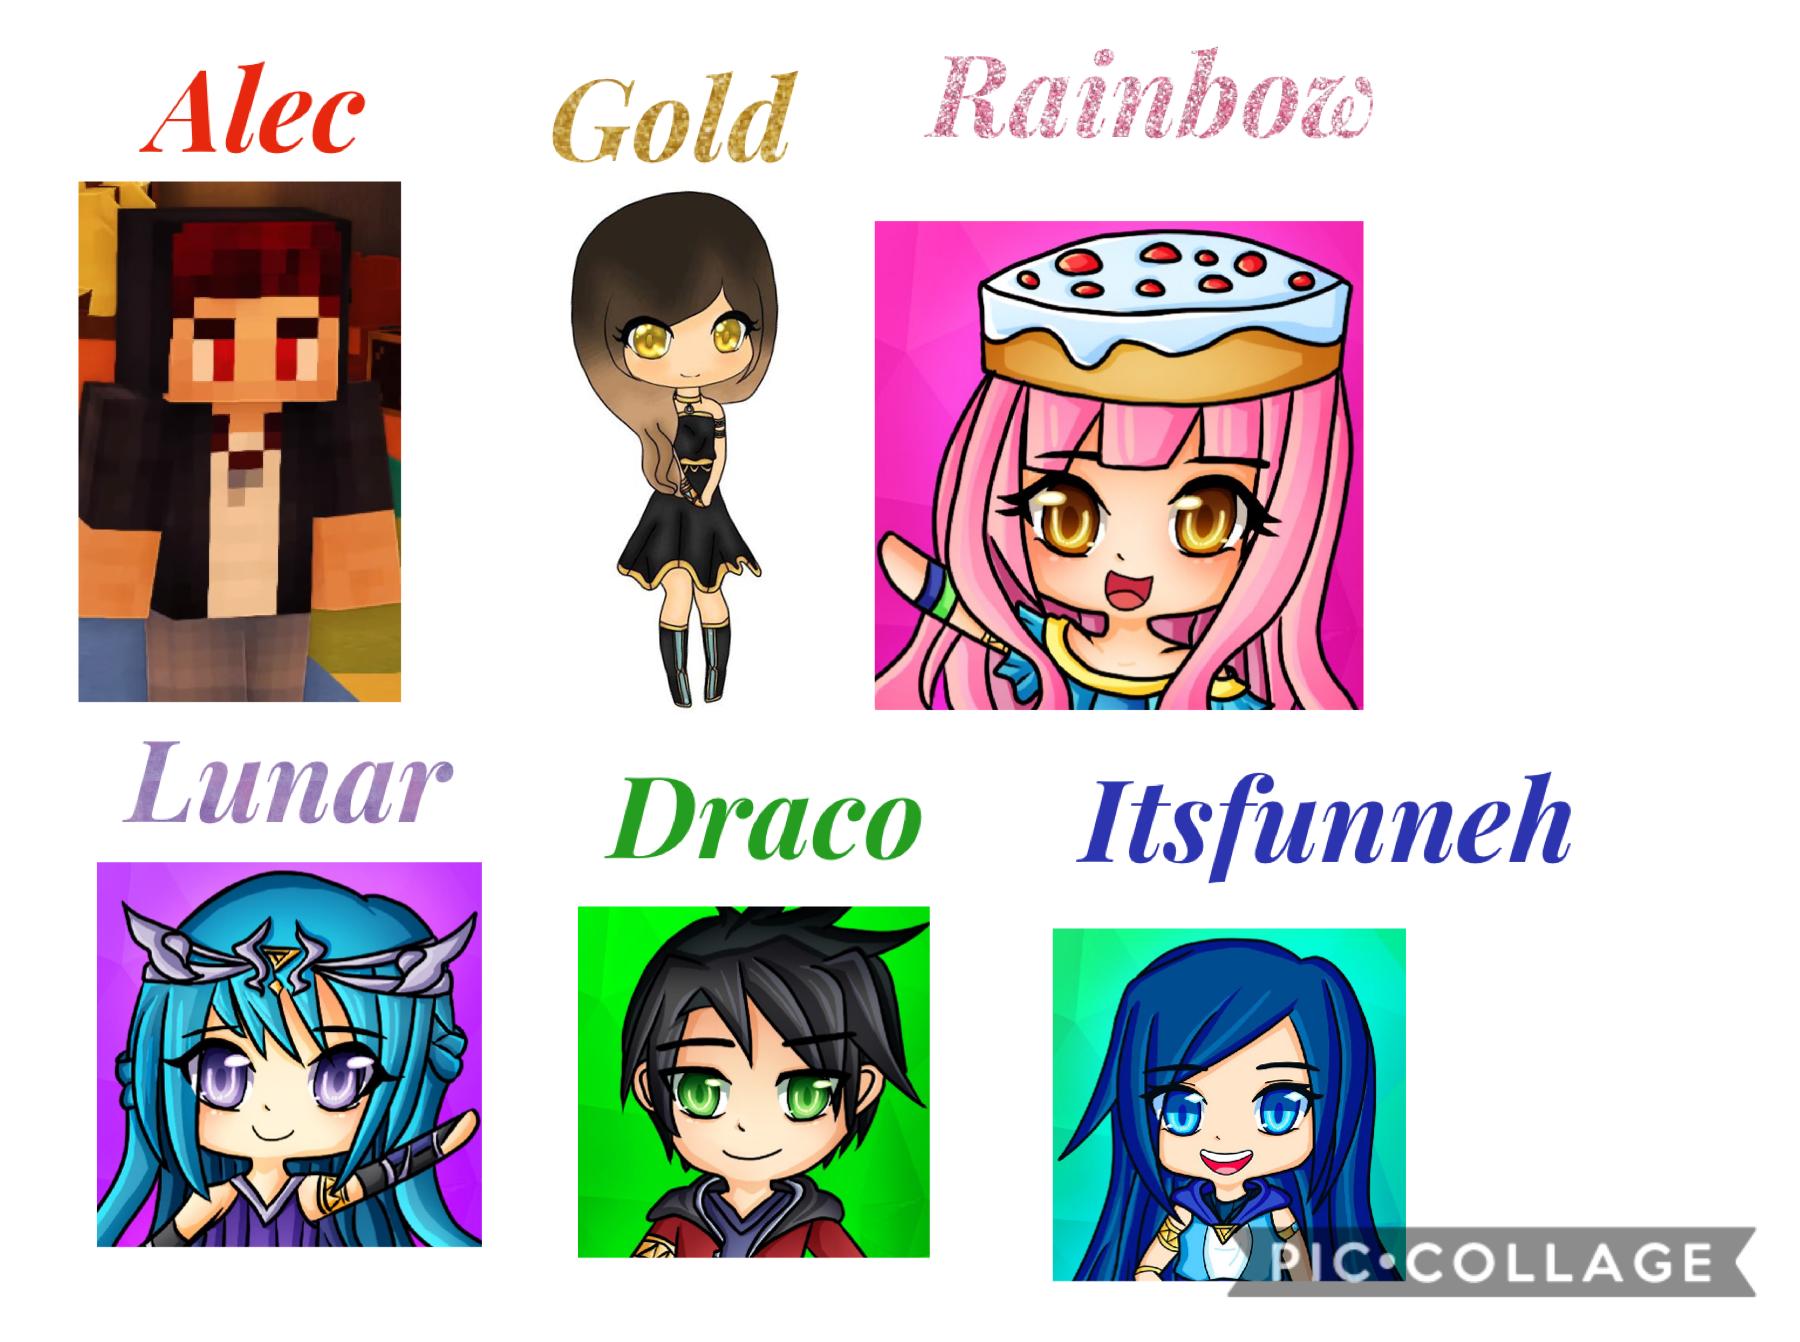 Itsfunneh, Rainbow, Alec, Draco, Gold, and Lunar
YouTubers 